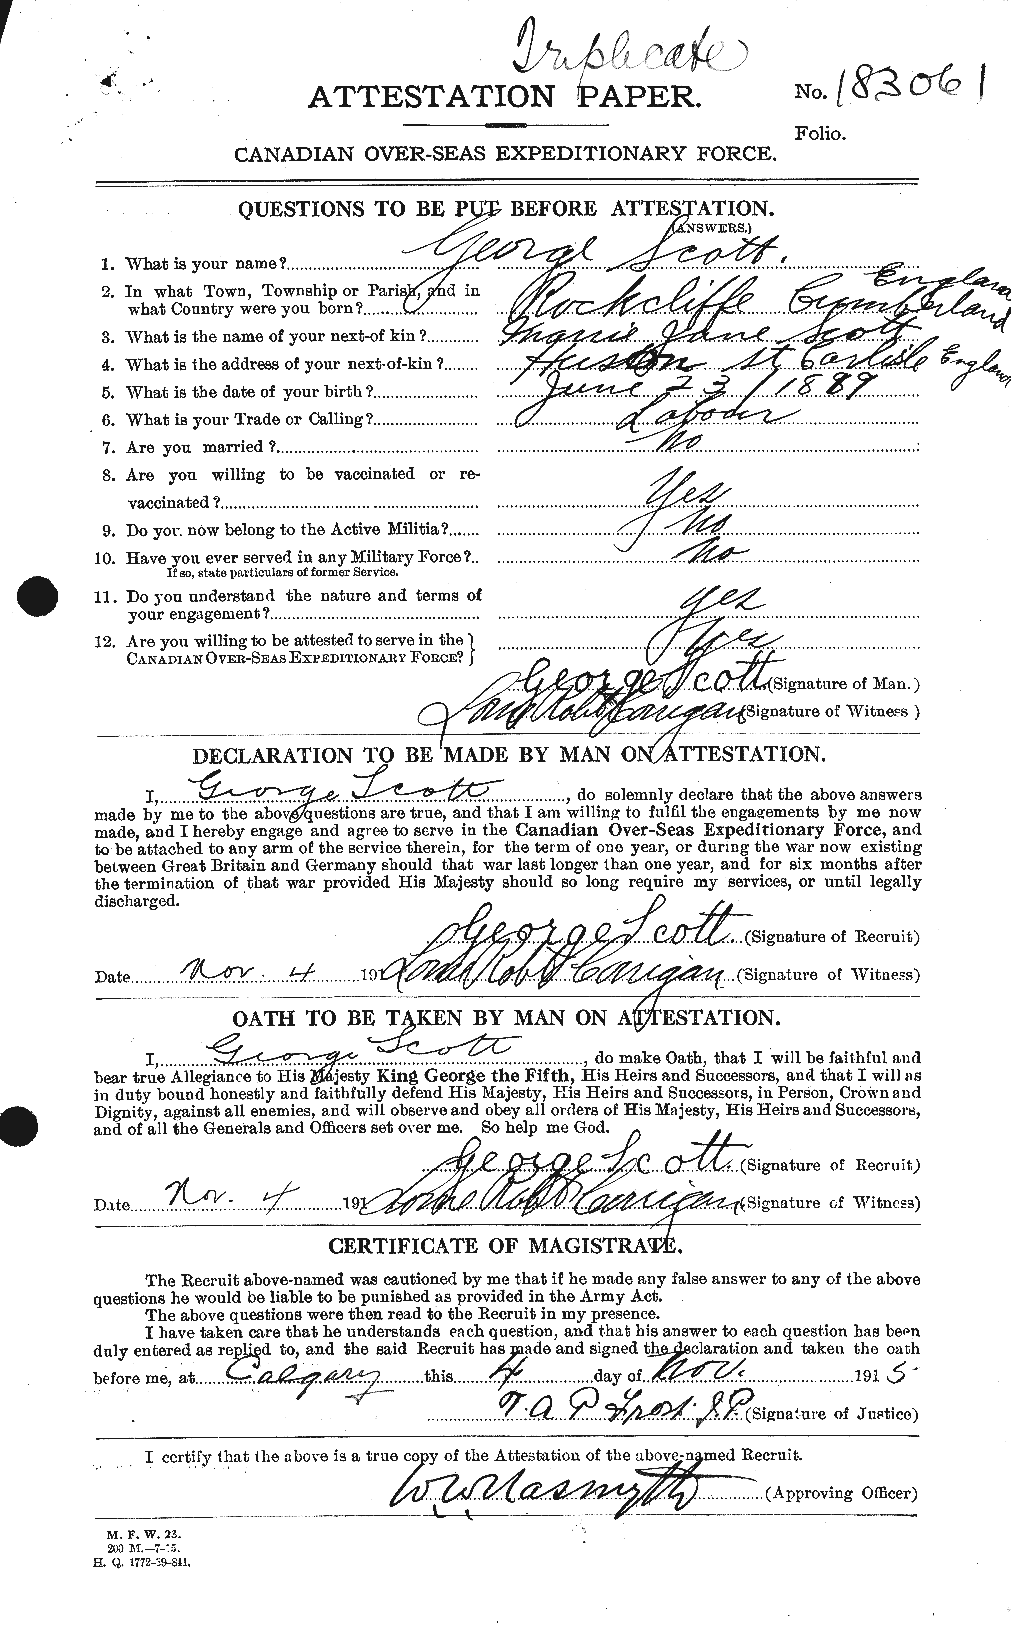 Personnel Records of the First World War - CEF 084357a